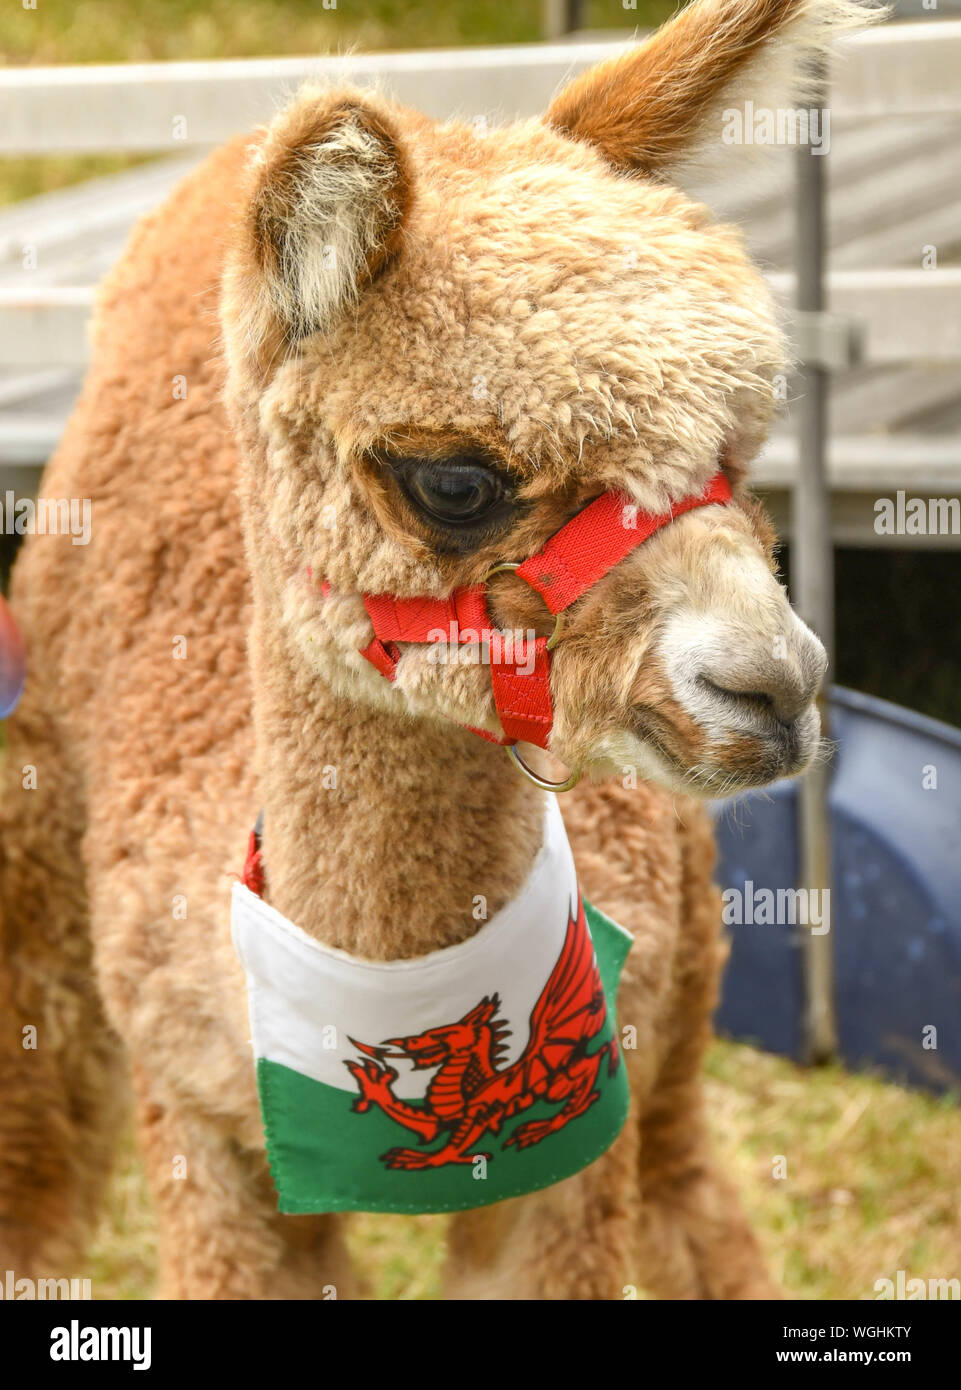 BUILTH WELLS, POWYS, WALES - JULY 2018: Young llama with a Welsh flag around its neck at the Royal Welsh Show Stock Photo